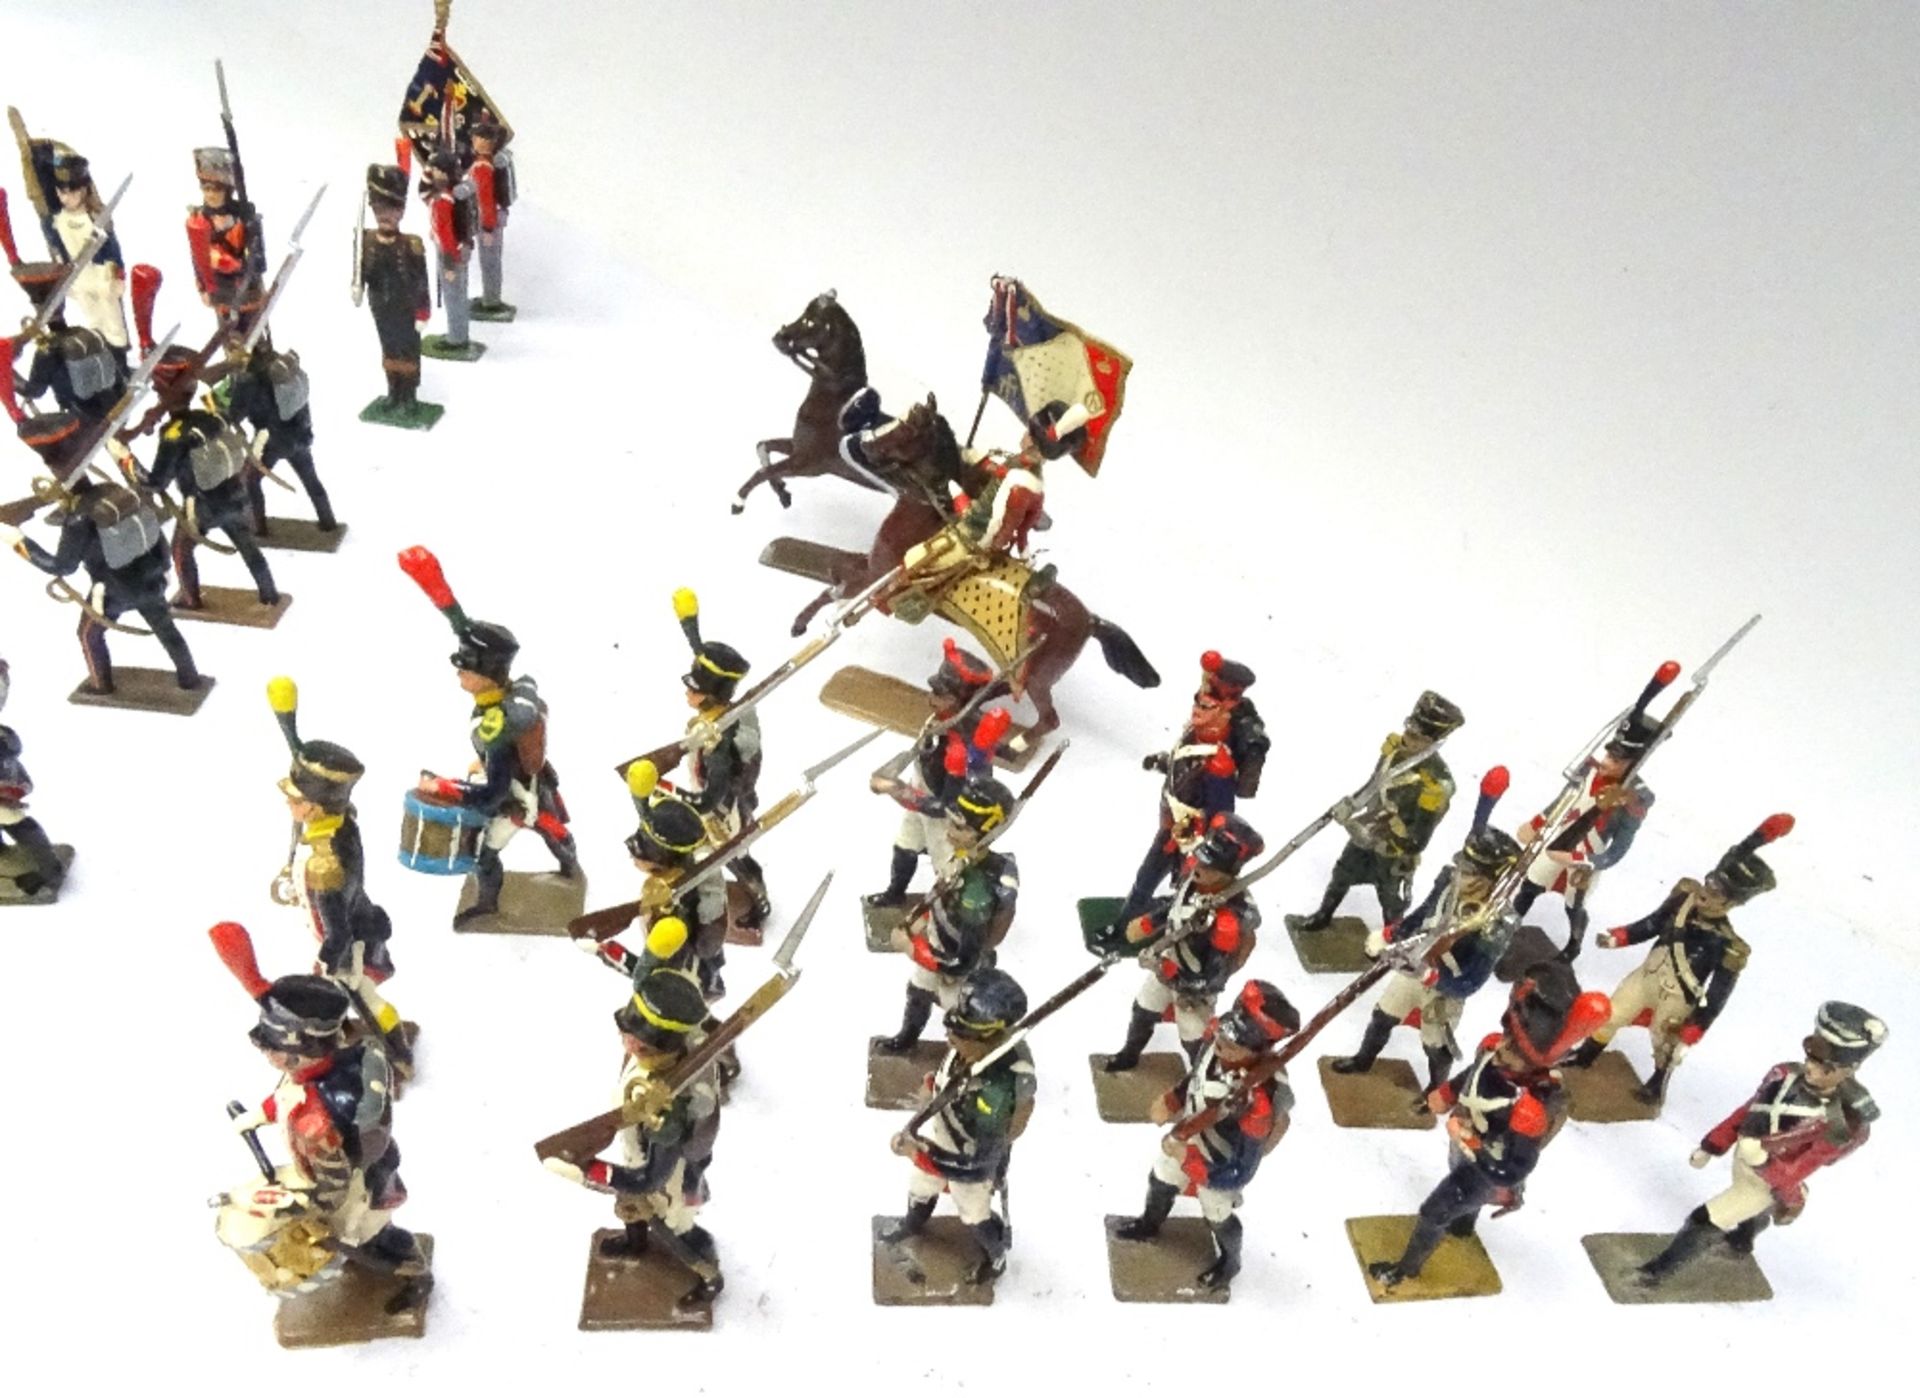 CBG Mignot Napoleonic First Empire Marines of the Imperial Guard - Image 4 of 7